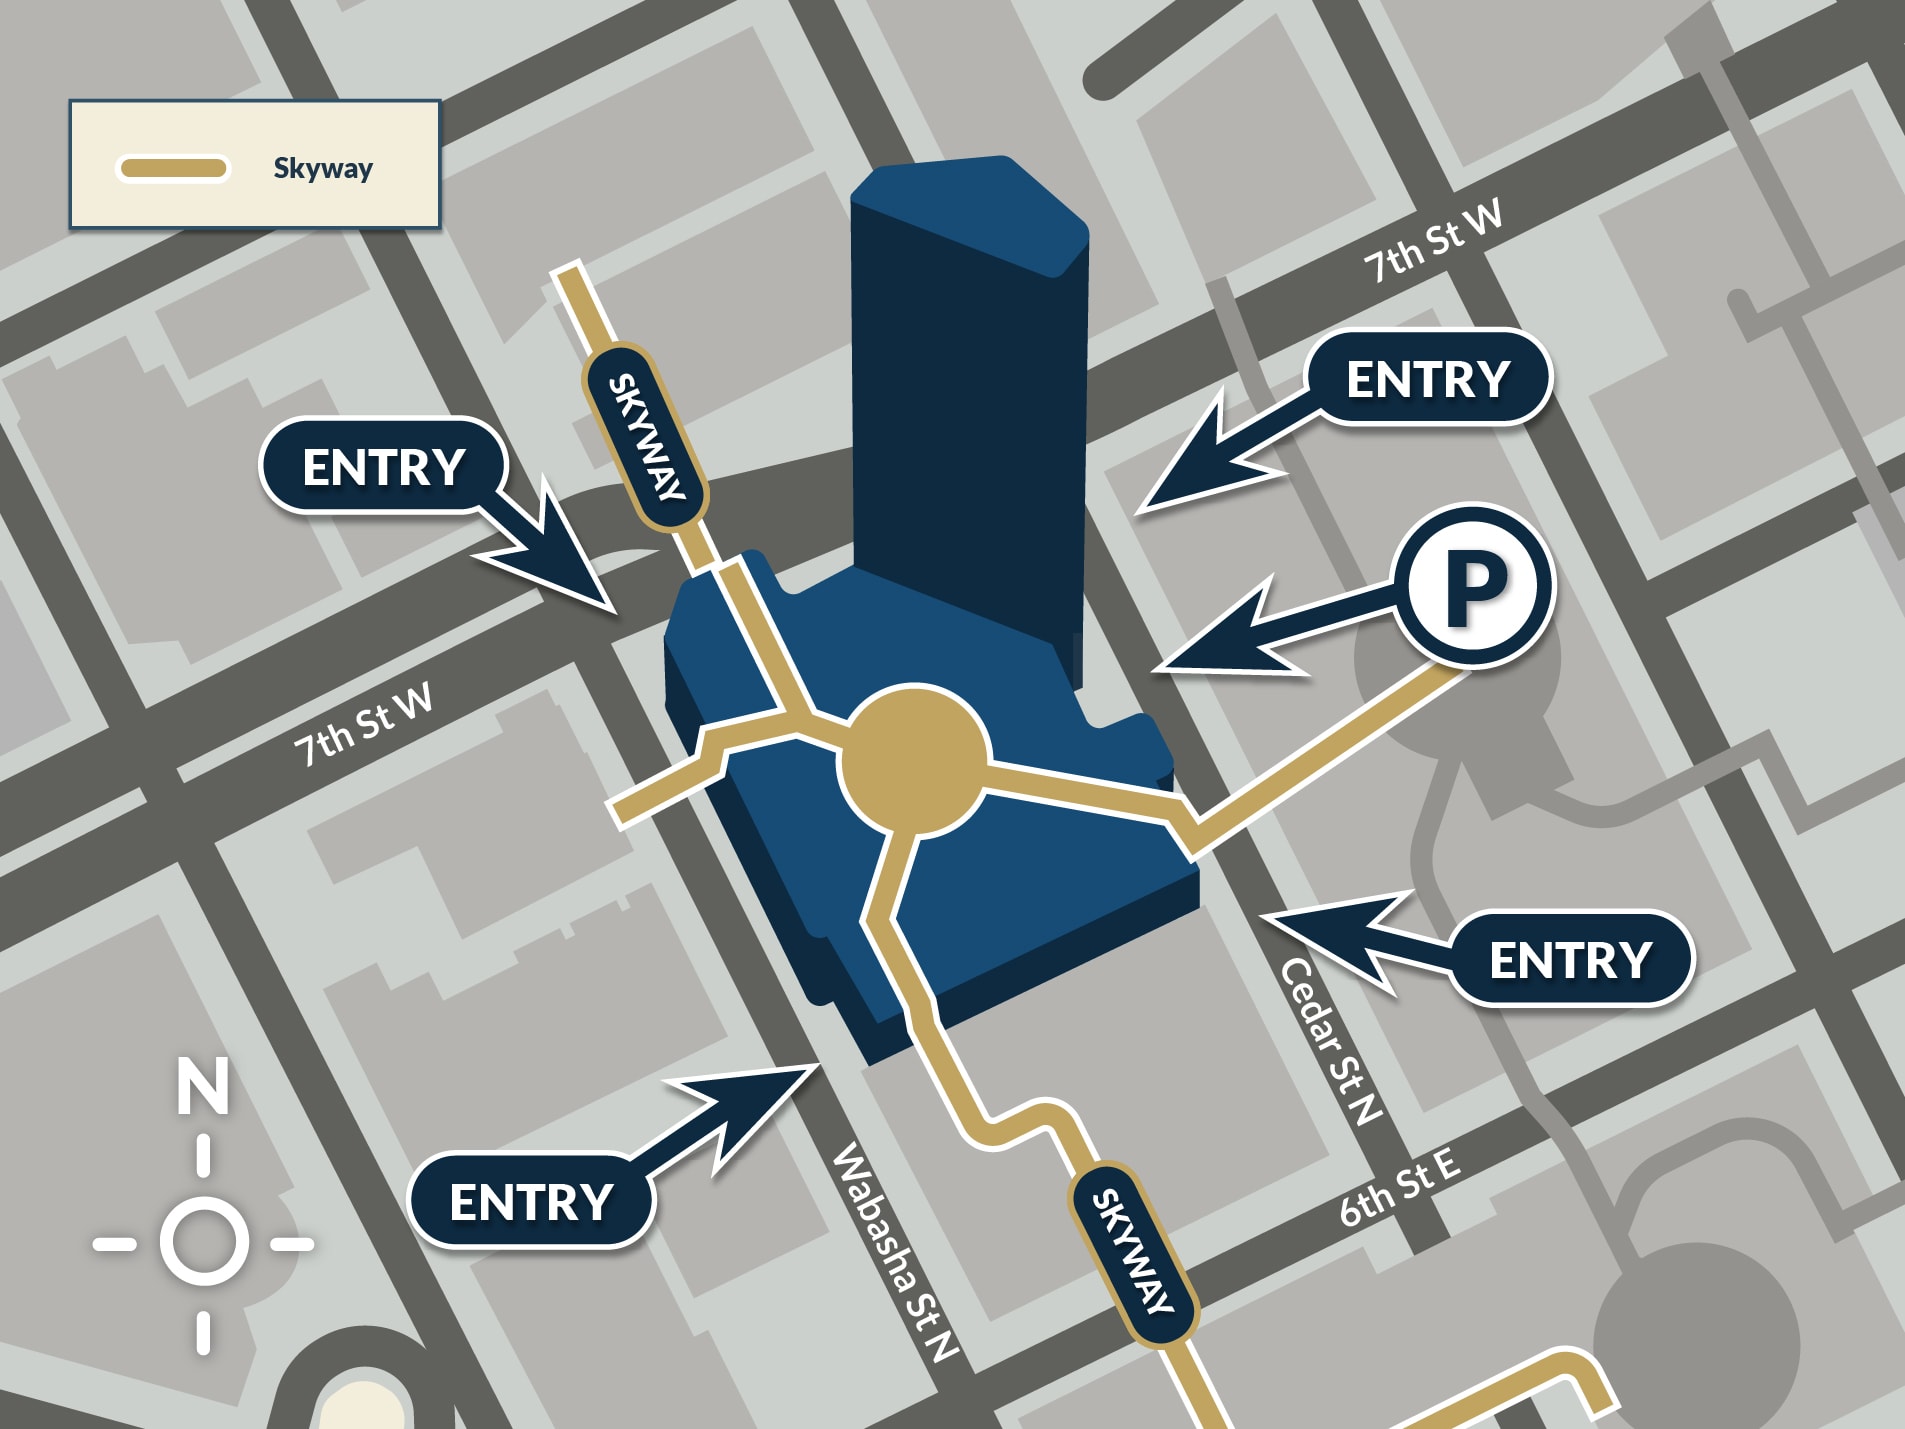 Wells Fargo Place entryway map